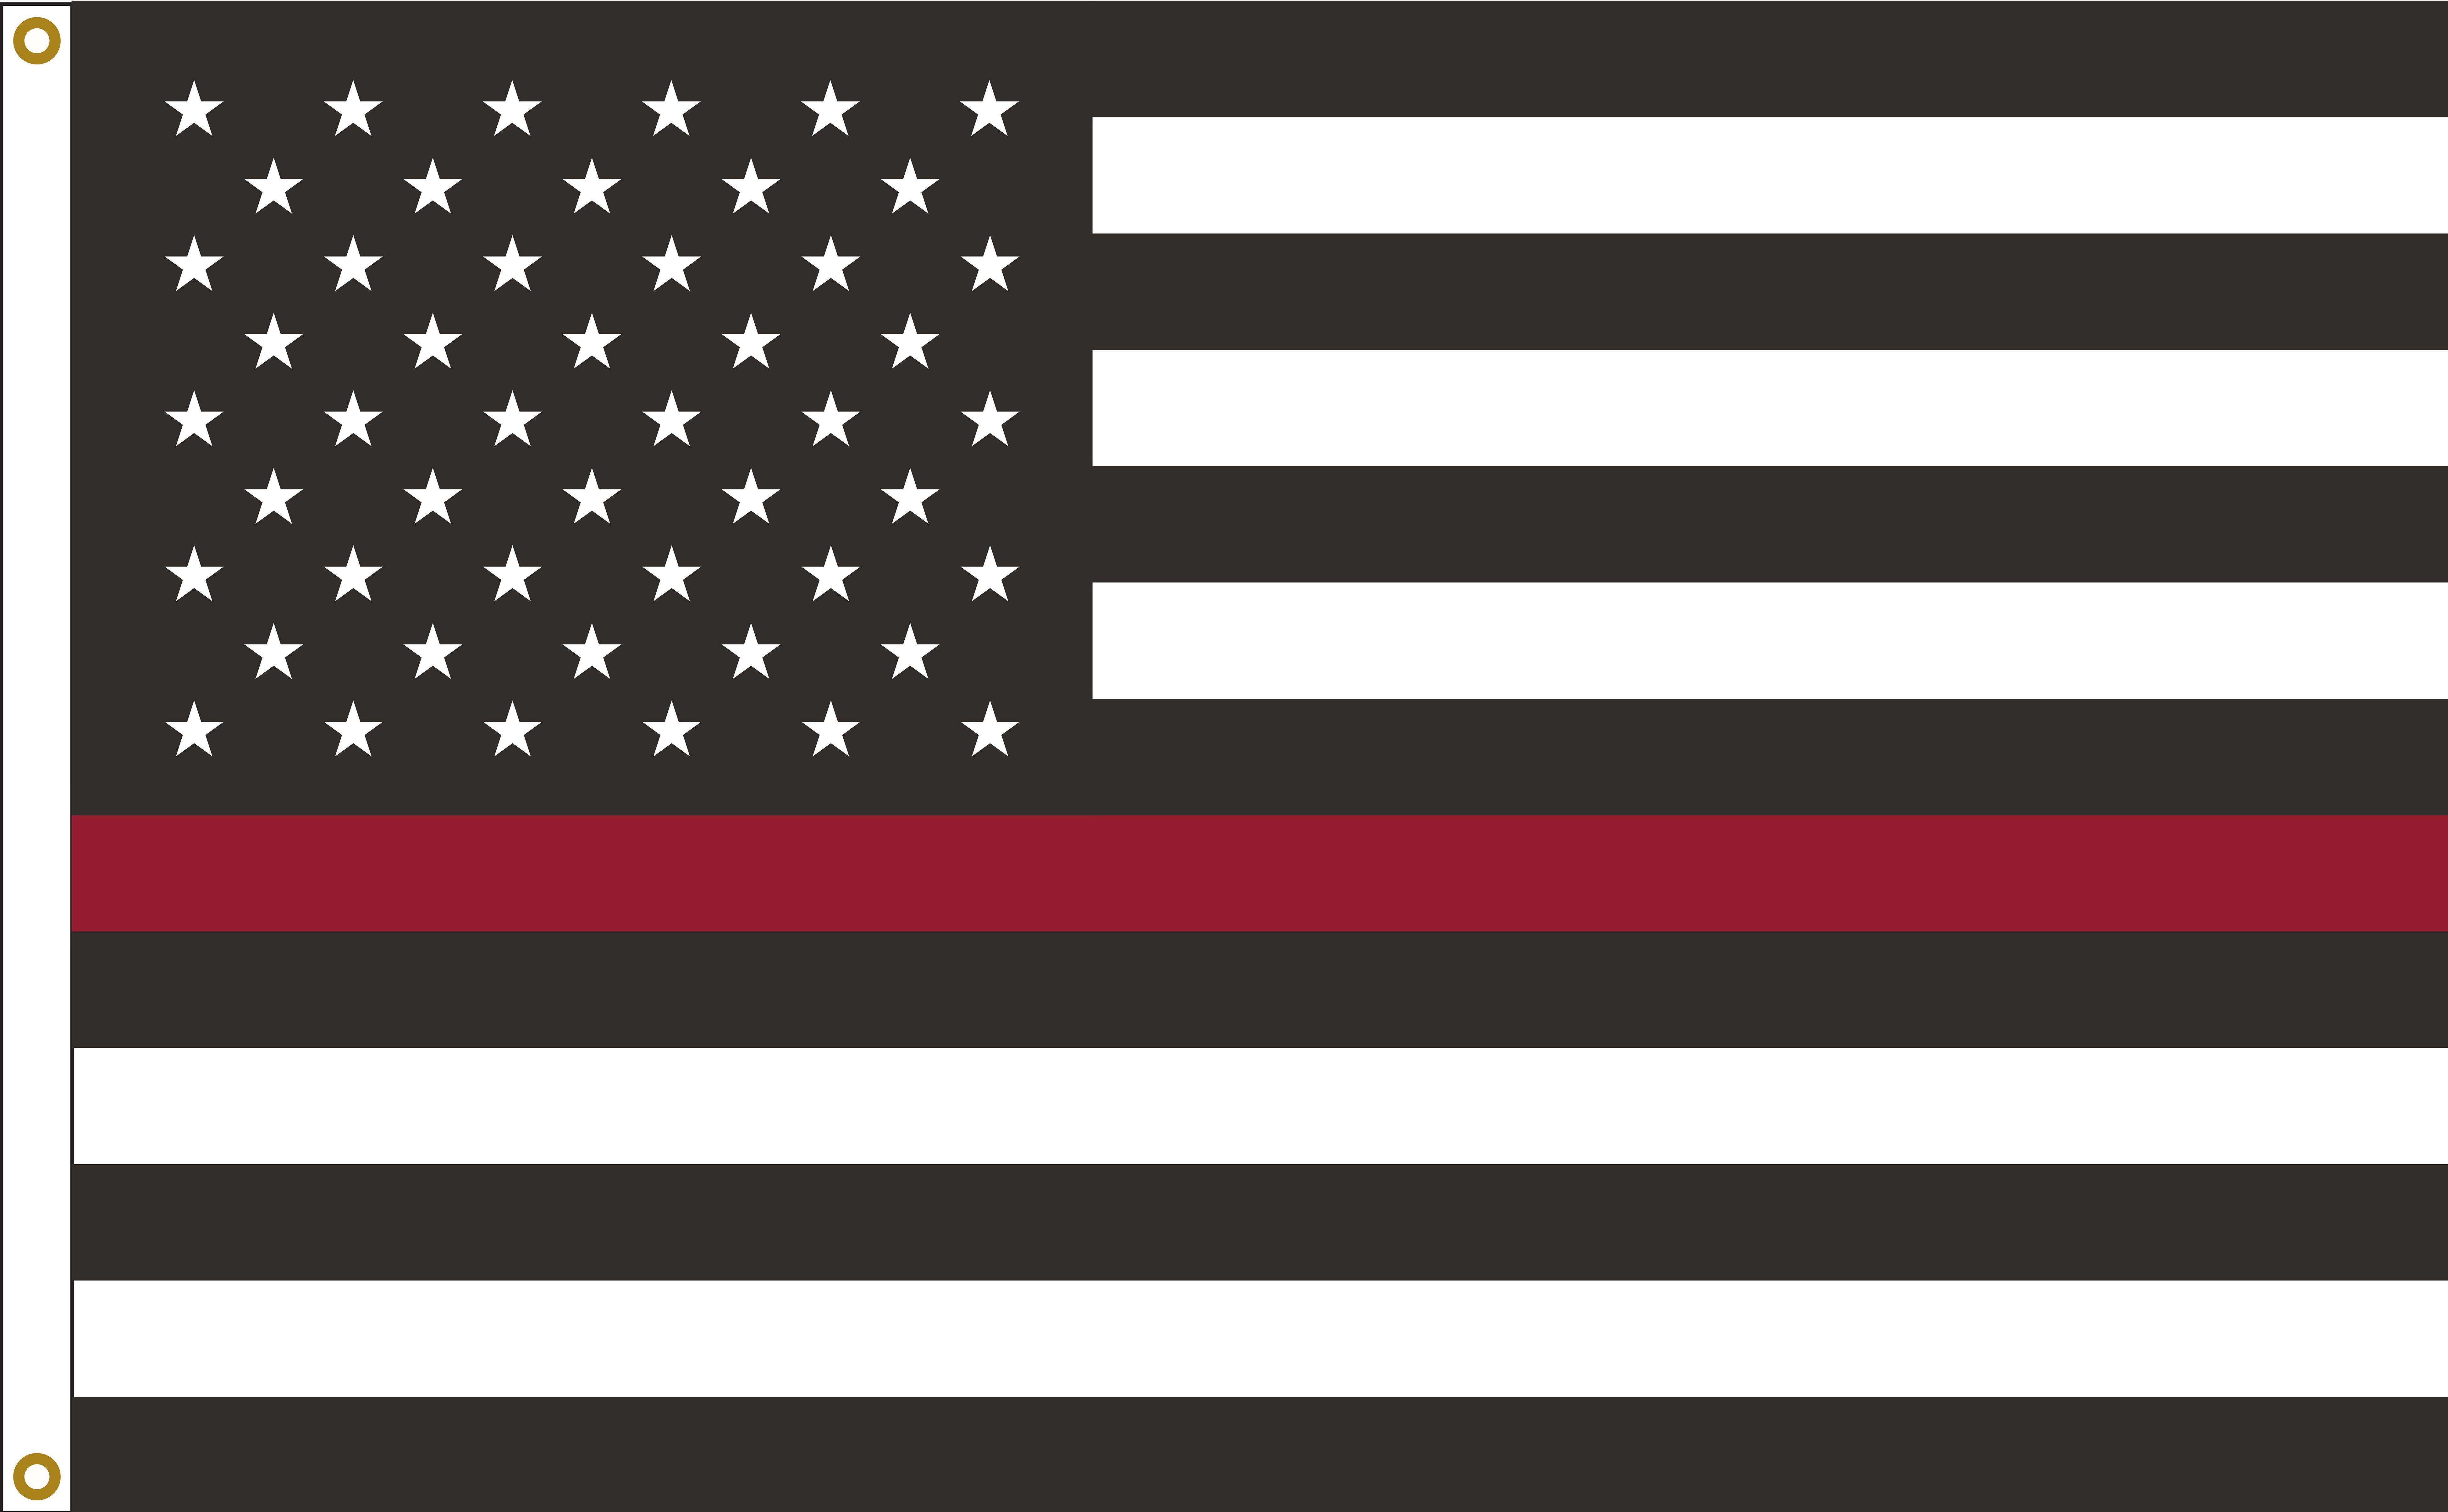 Thin Red Line Logo - Military Flags :: Thin Red Line U.S. 3x5' - Flags and Banners | Buy ...